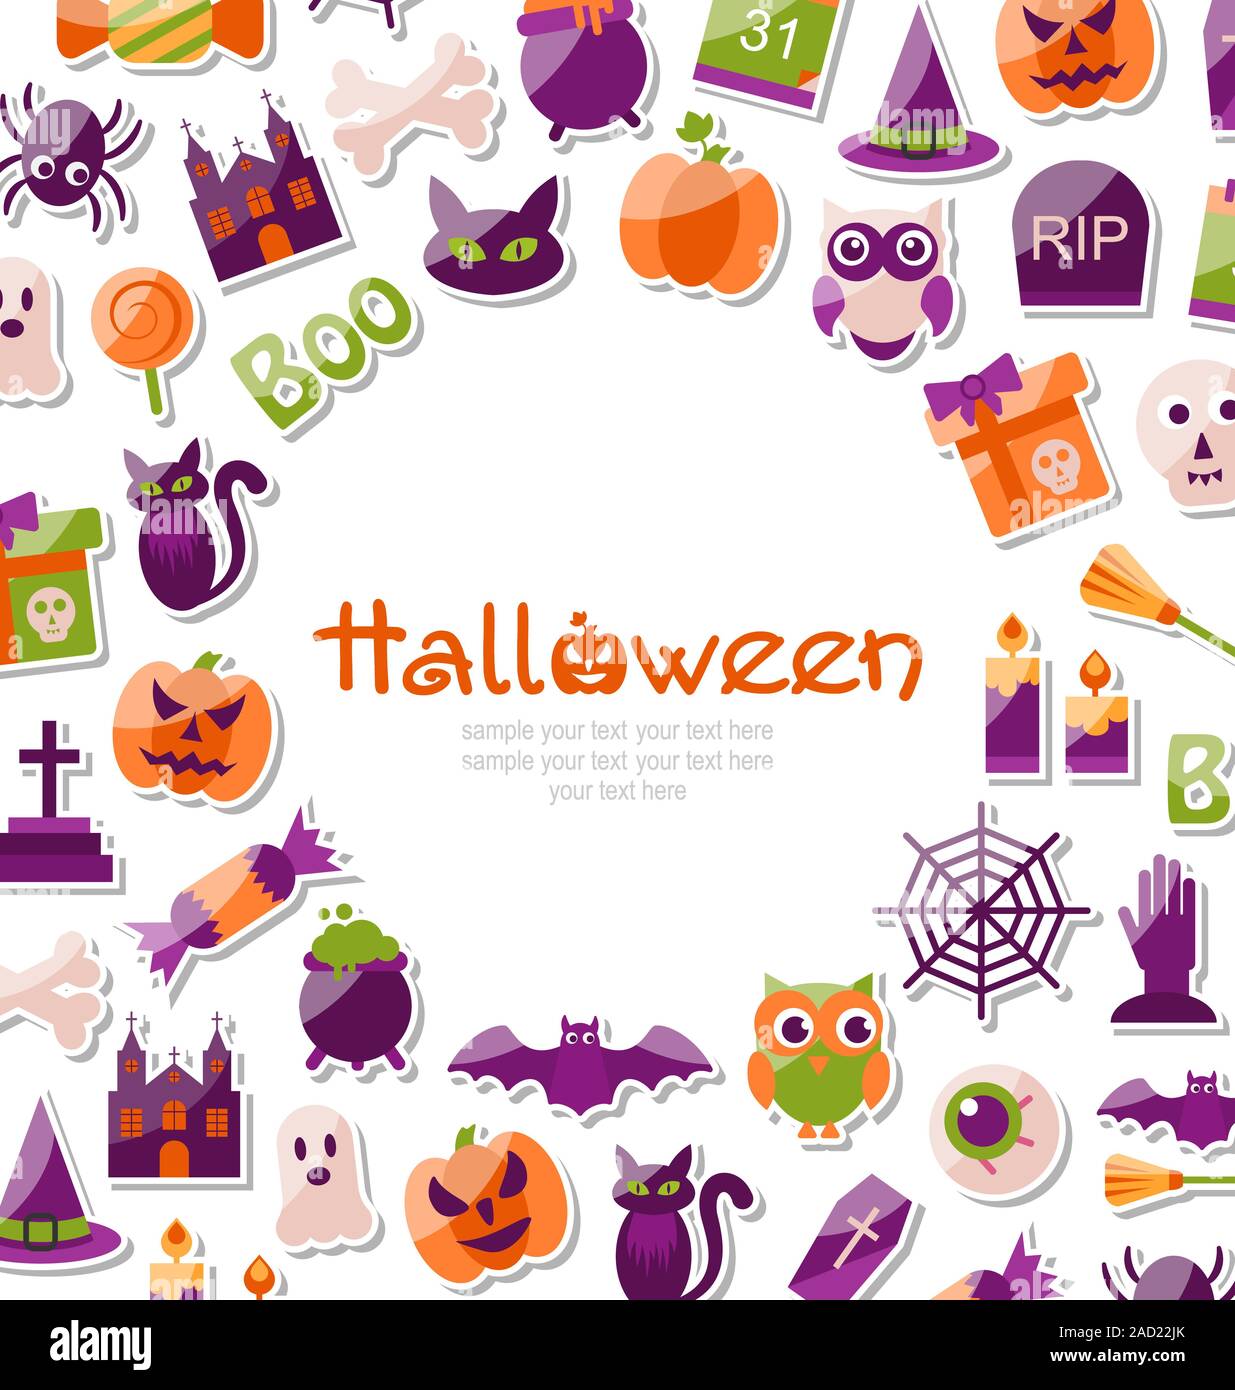 Halloween Card. Set of Bright Signs, Icons and Objects Stock Photo